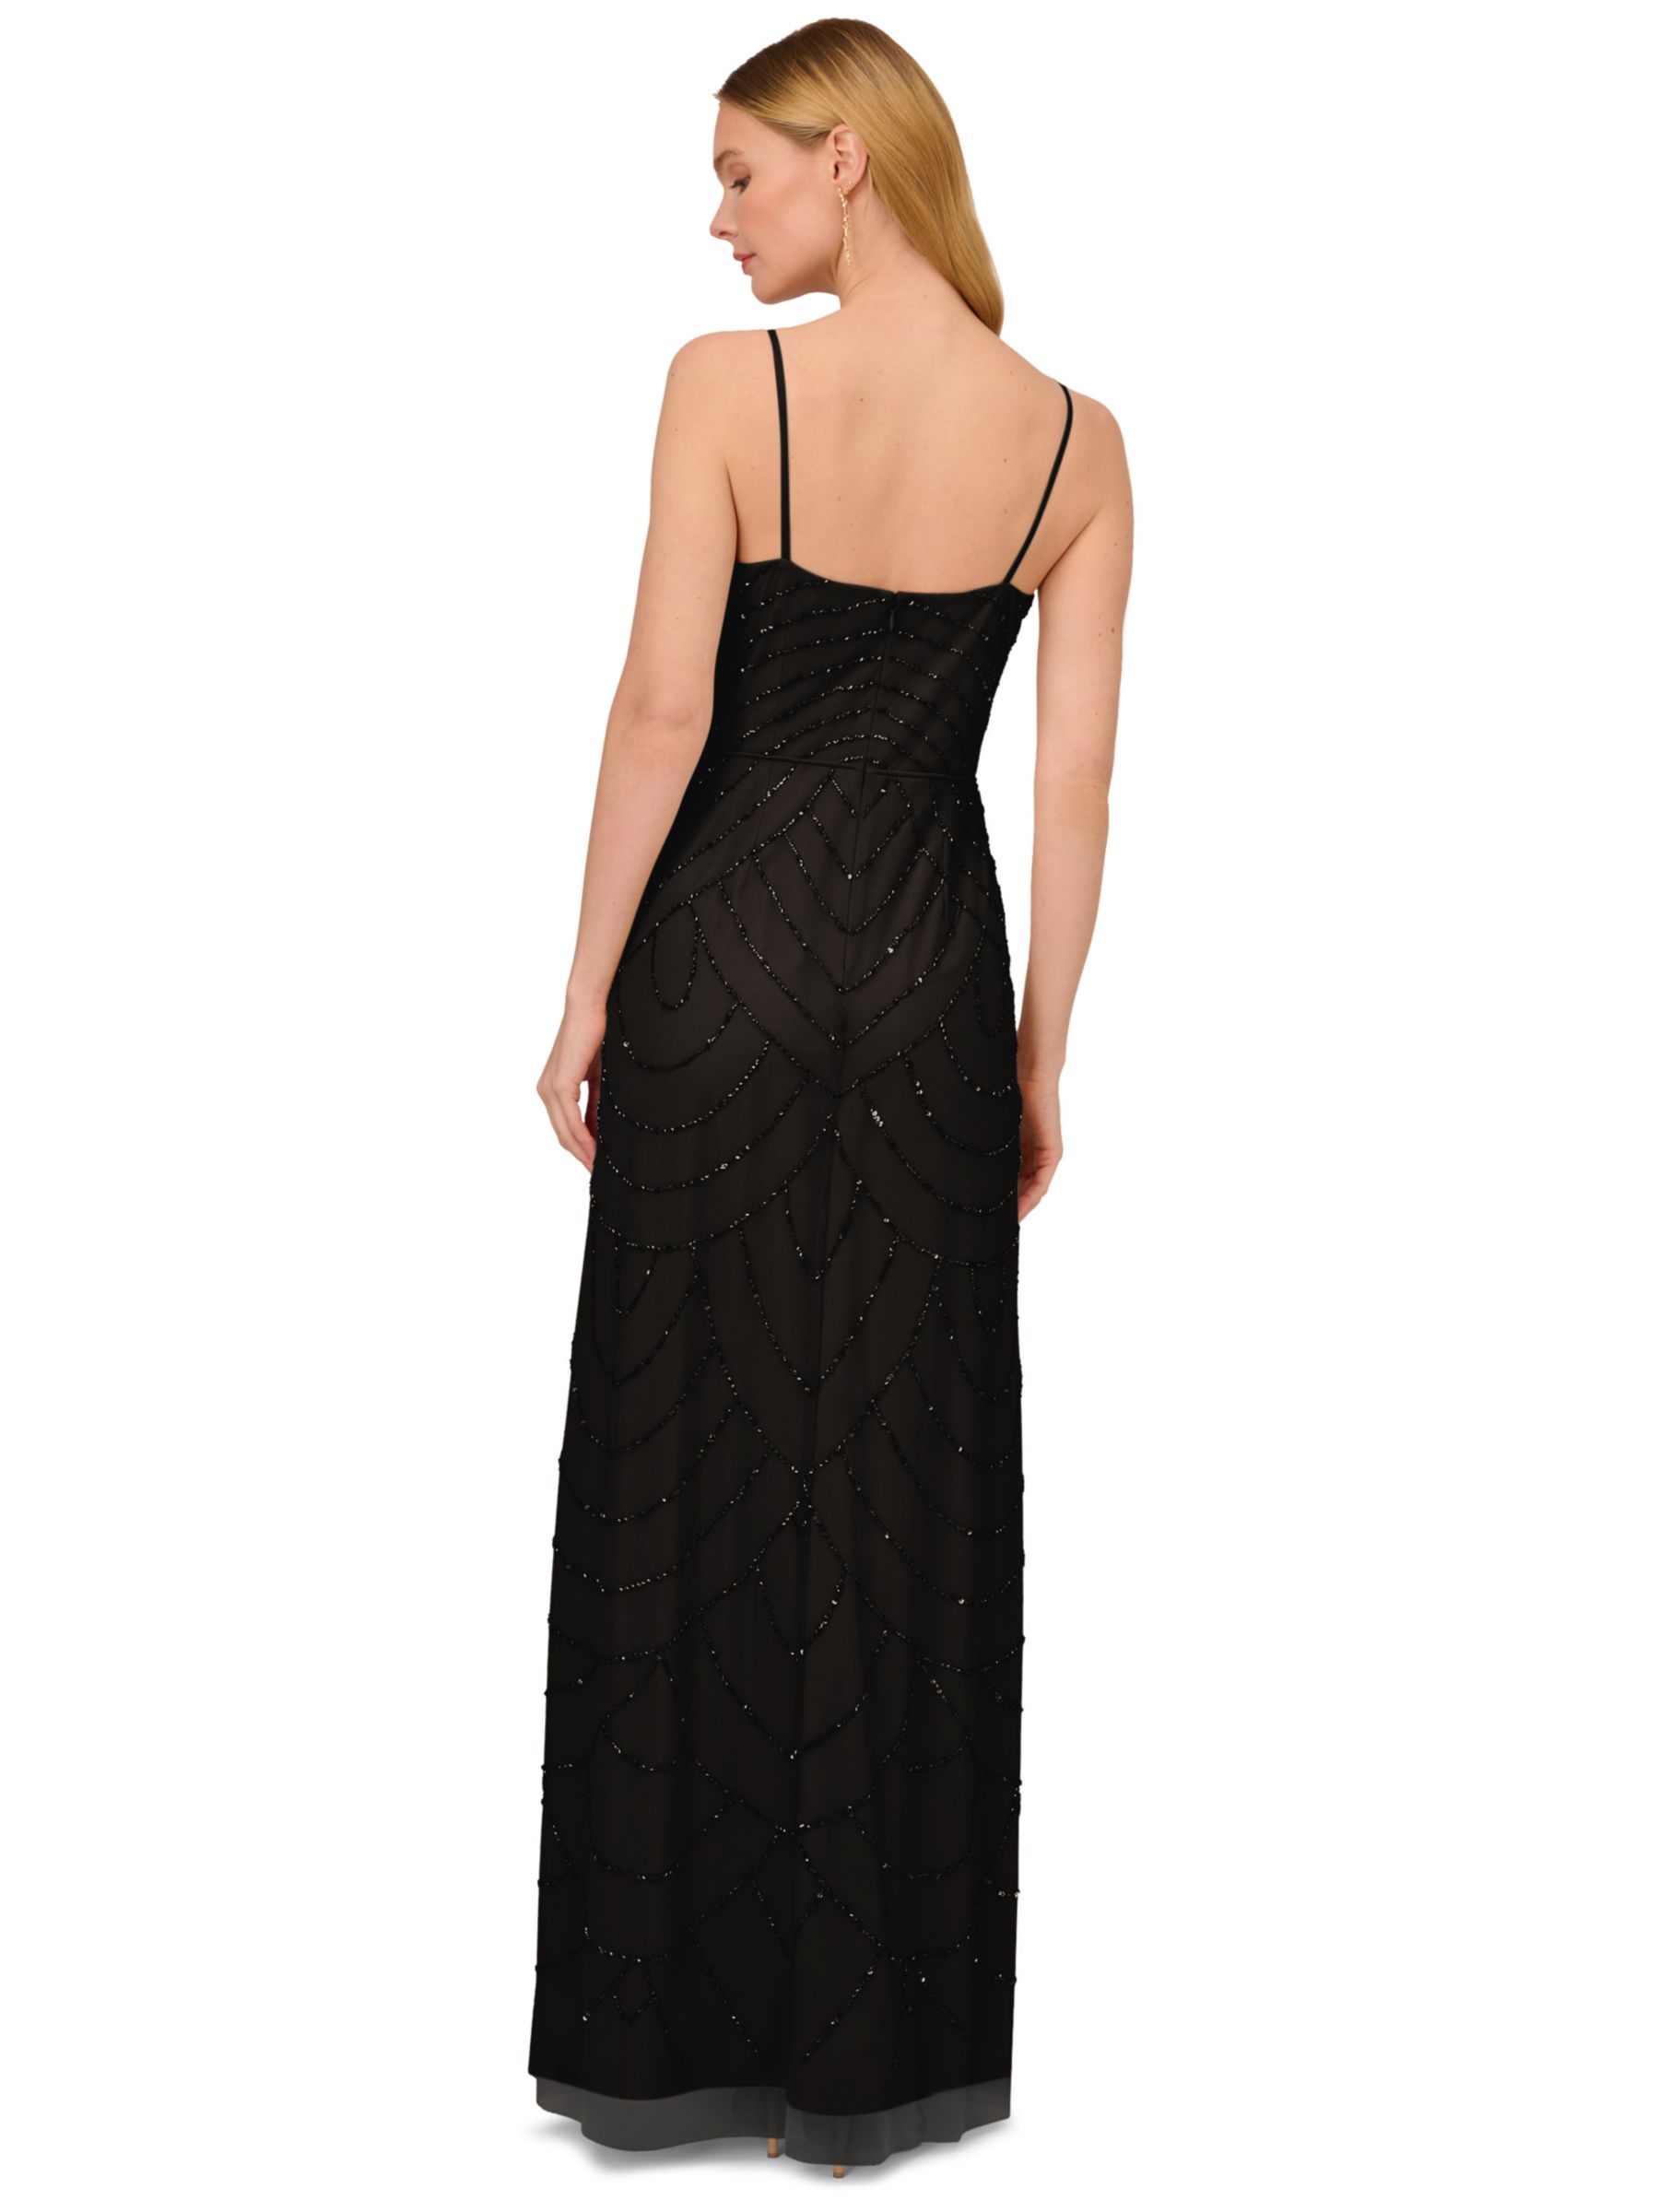 Buy Adrianna Papell Beaded Cowl Deco Gown Dress, Black Online at johnlewis.com